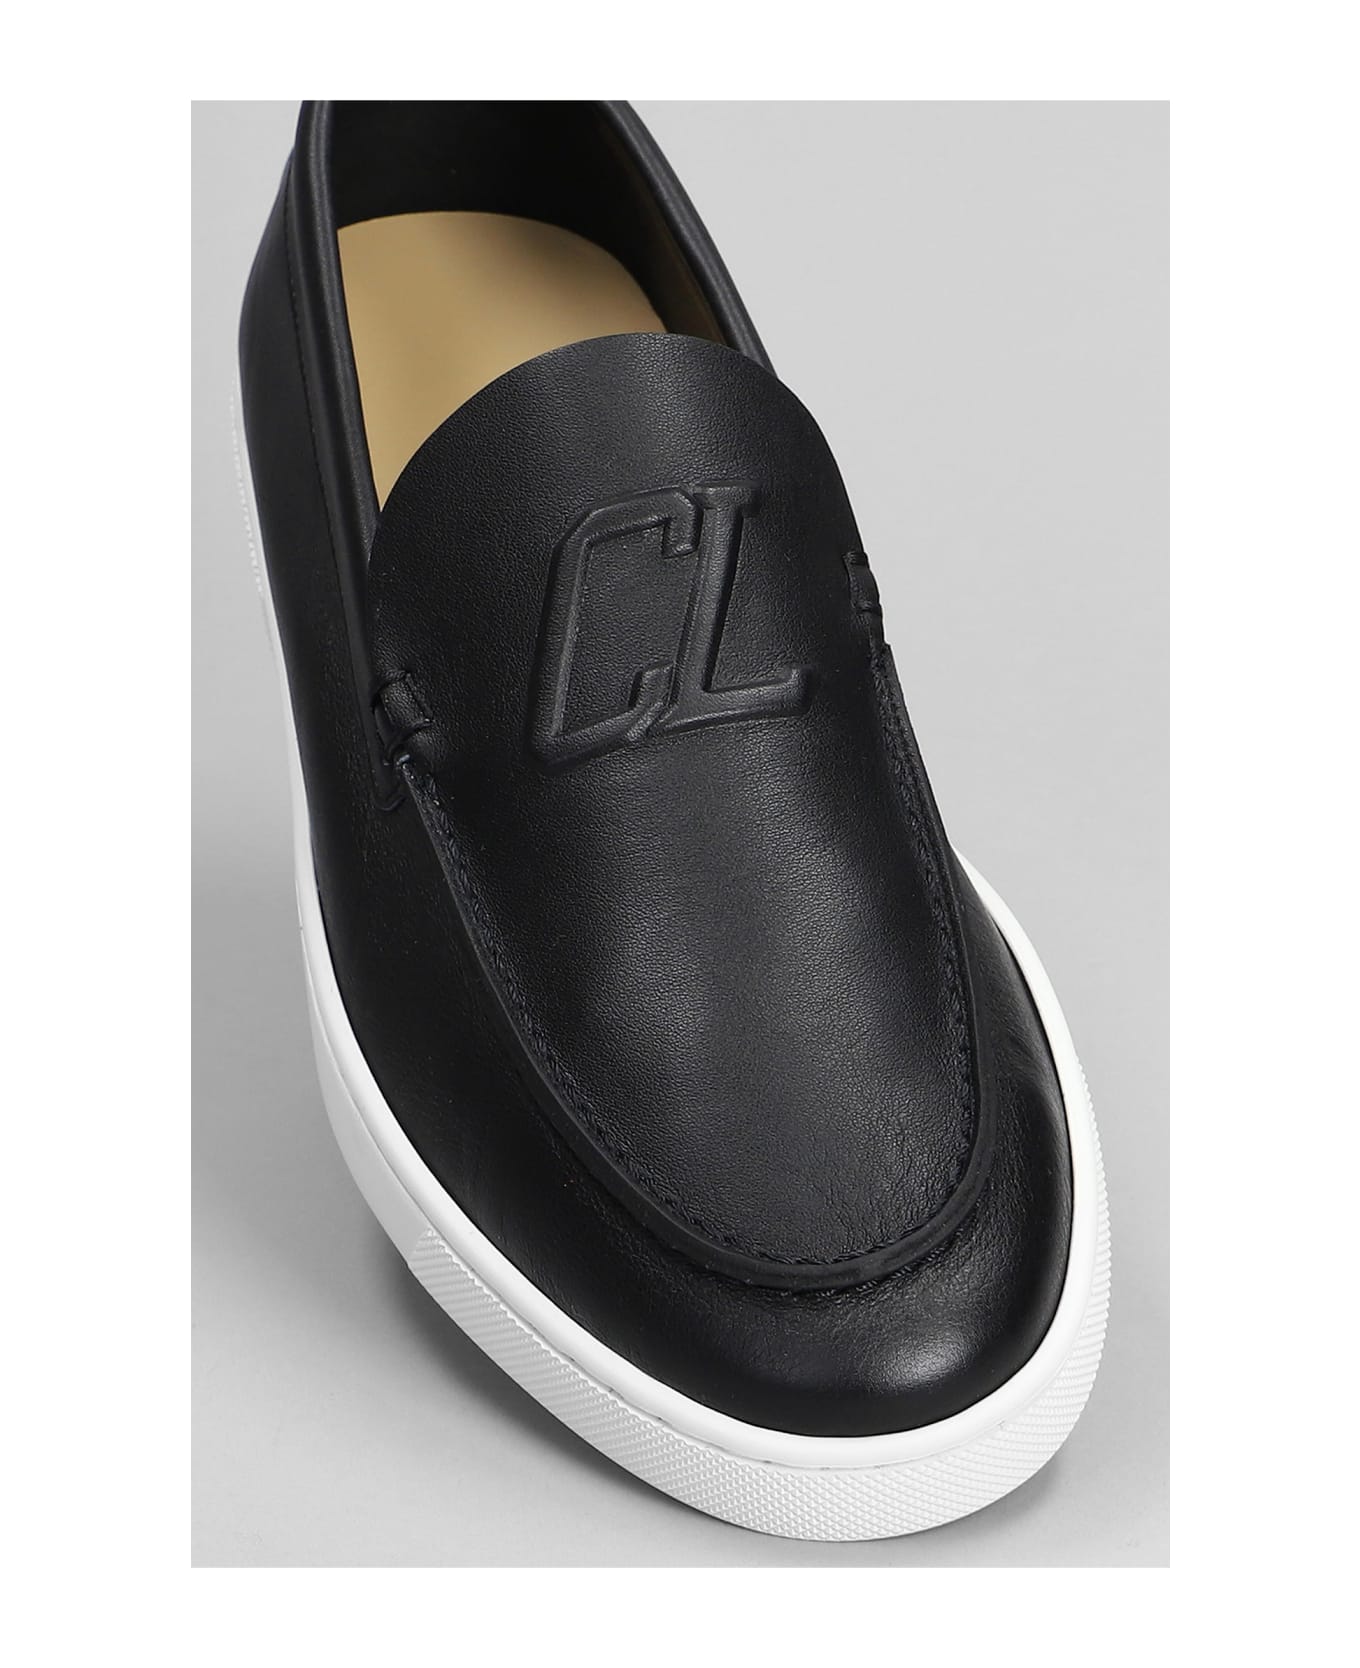 Christian Louboutin Varsiboat Loafers In Black Leather - black